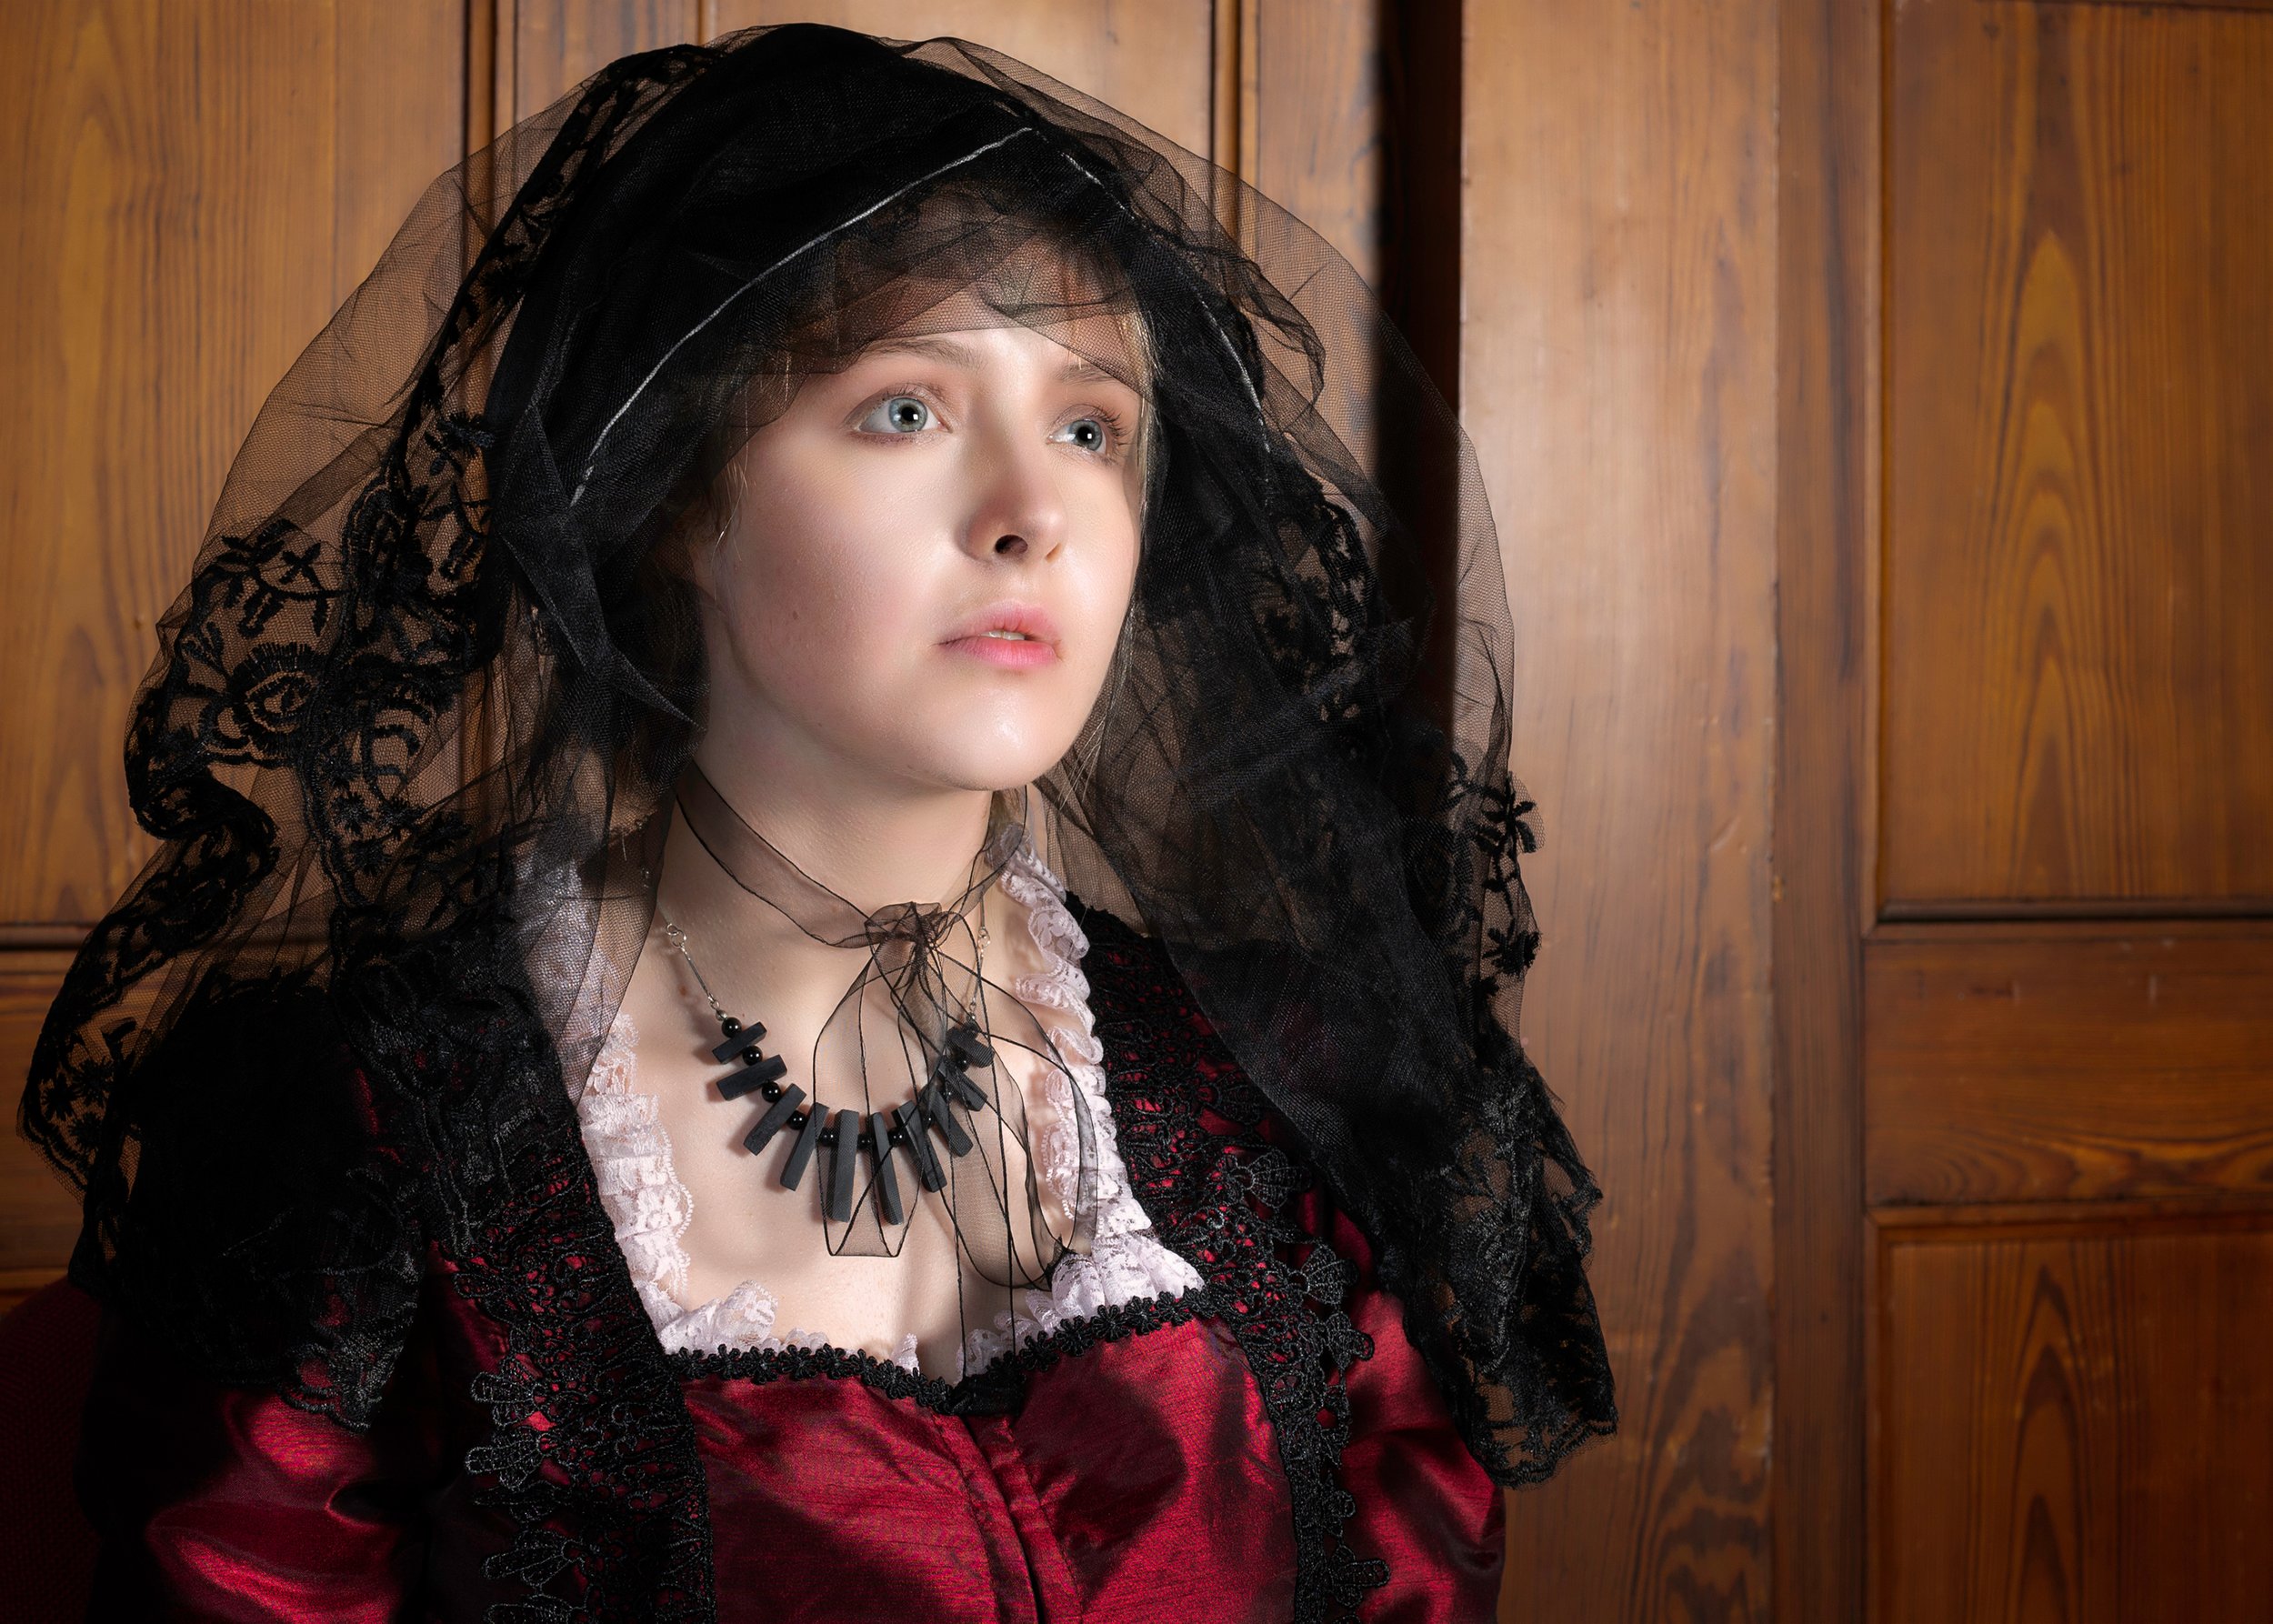  Image 1X0A8038FFrom Victorian period shoot with Maretta Vergette at Blofield Courthouse on 23-07-2019 